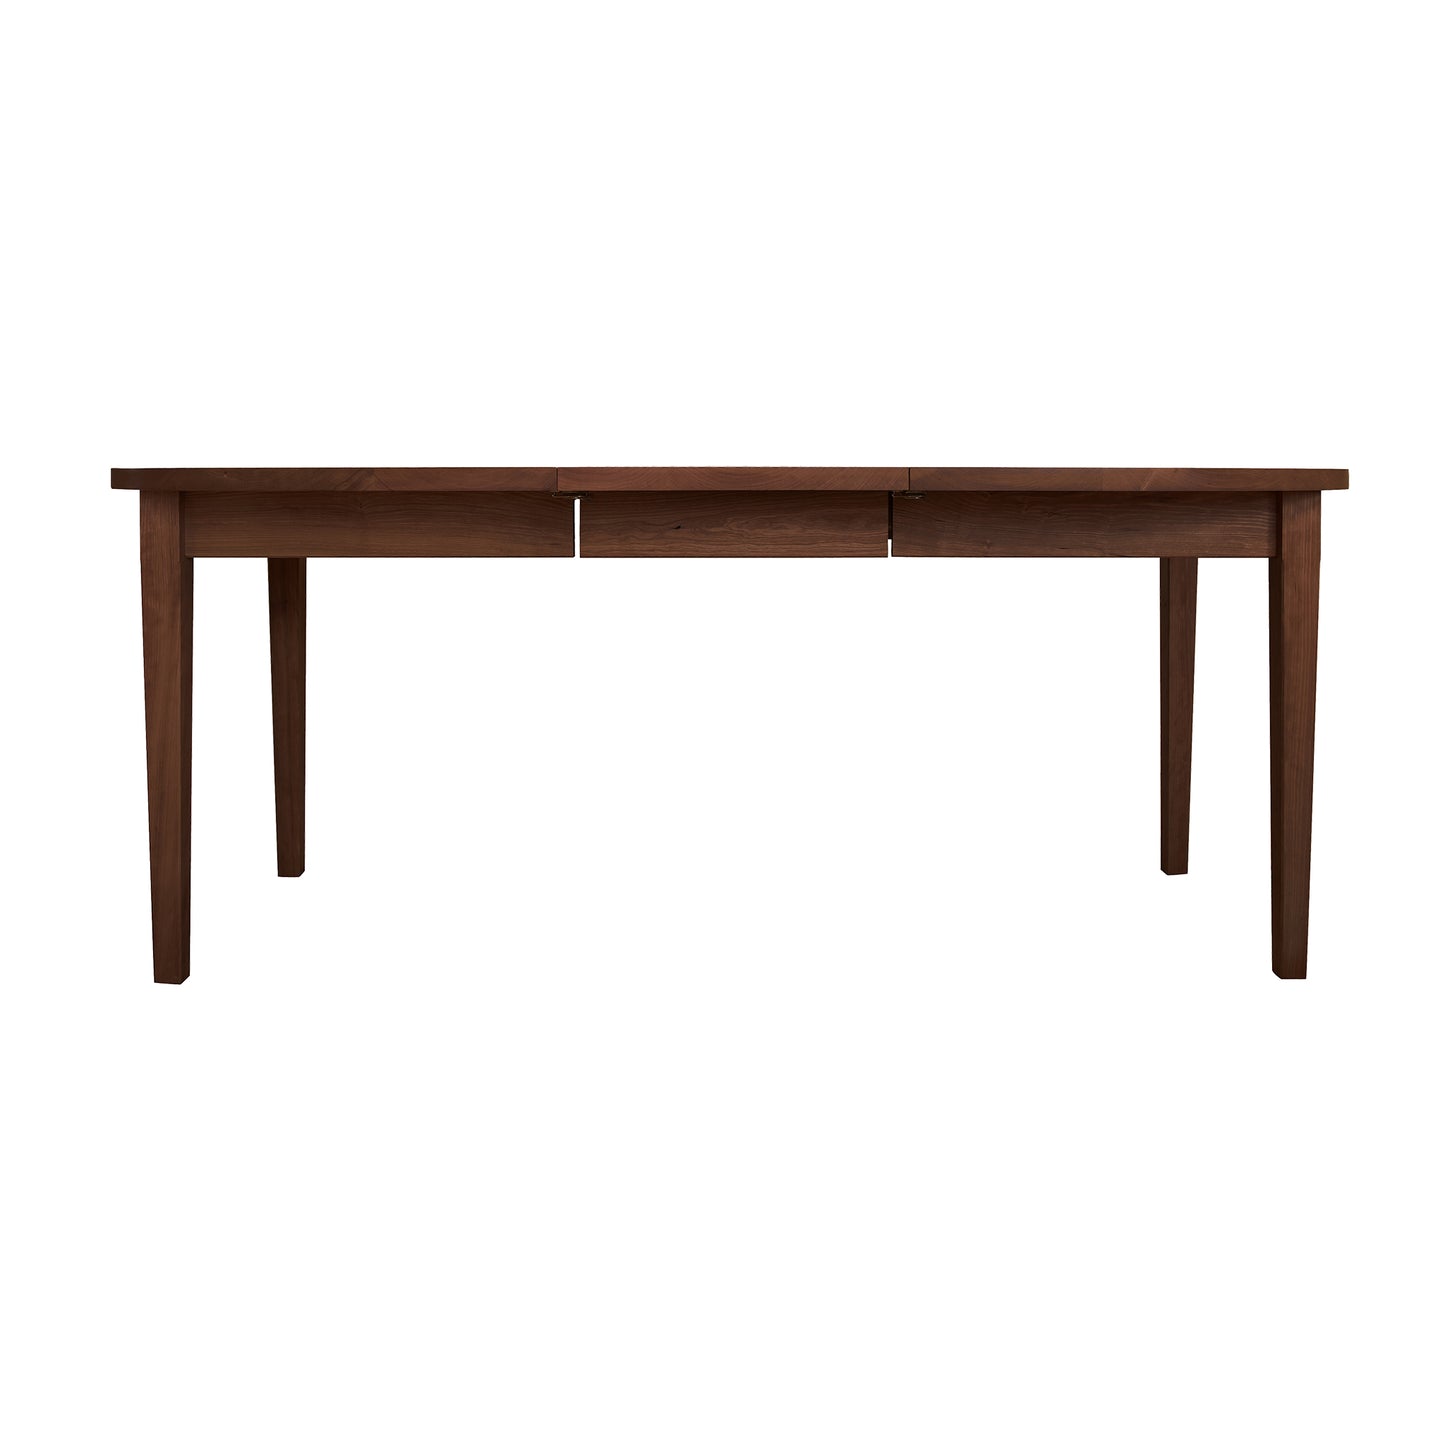 The Vermont Shaker Oval Extension Dining Table by Maple Corner Woodworks is a handcrafted wooden dining table that features two drawers.